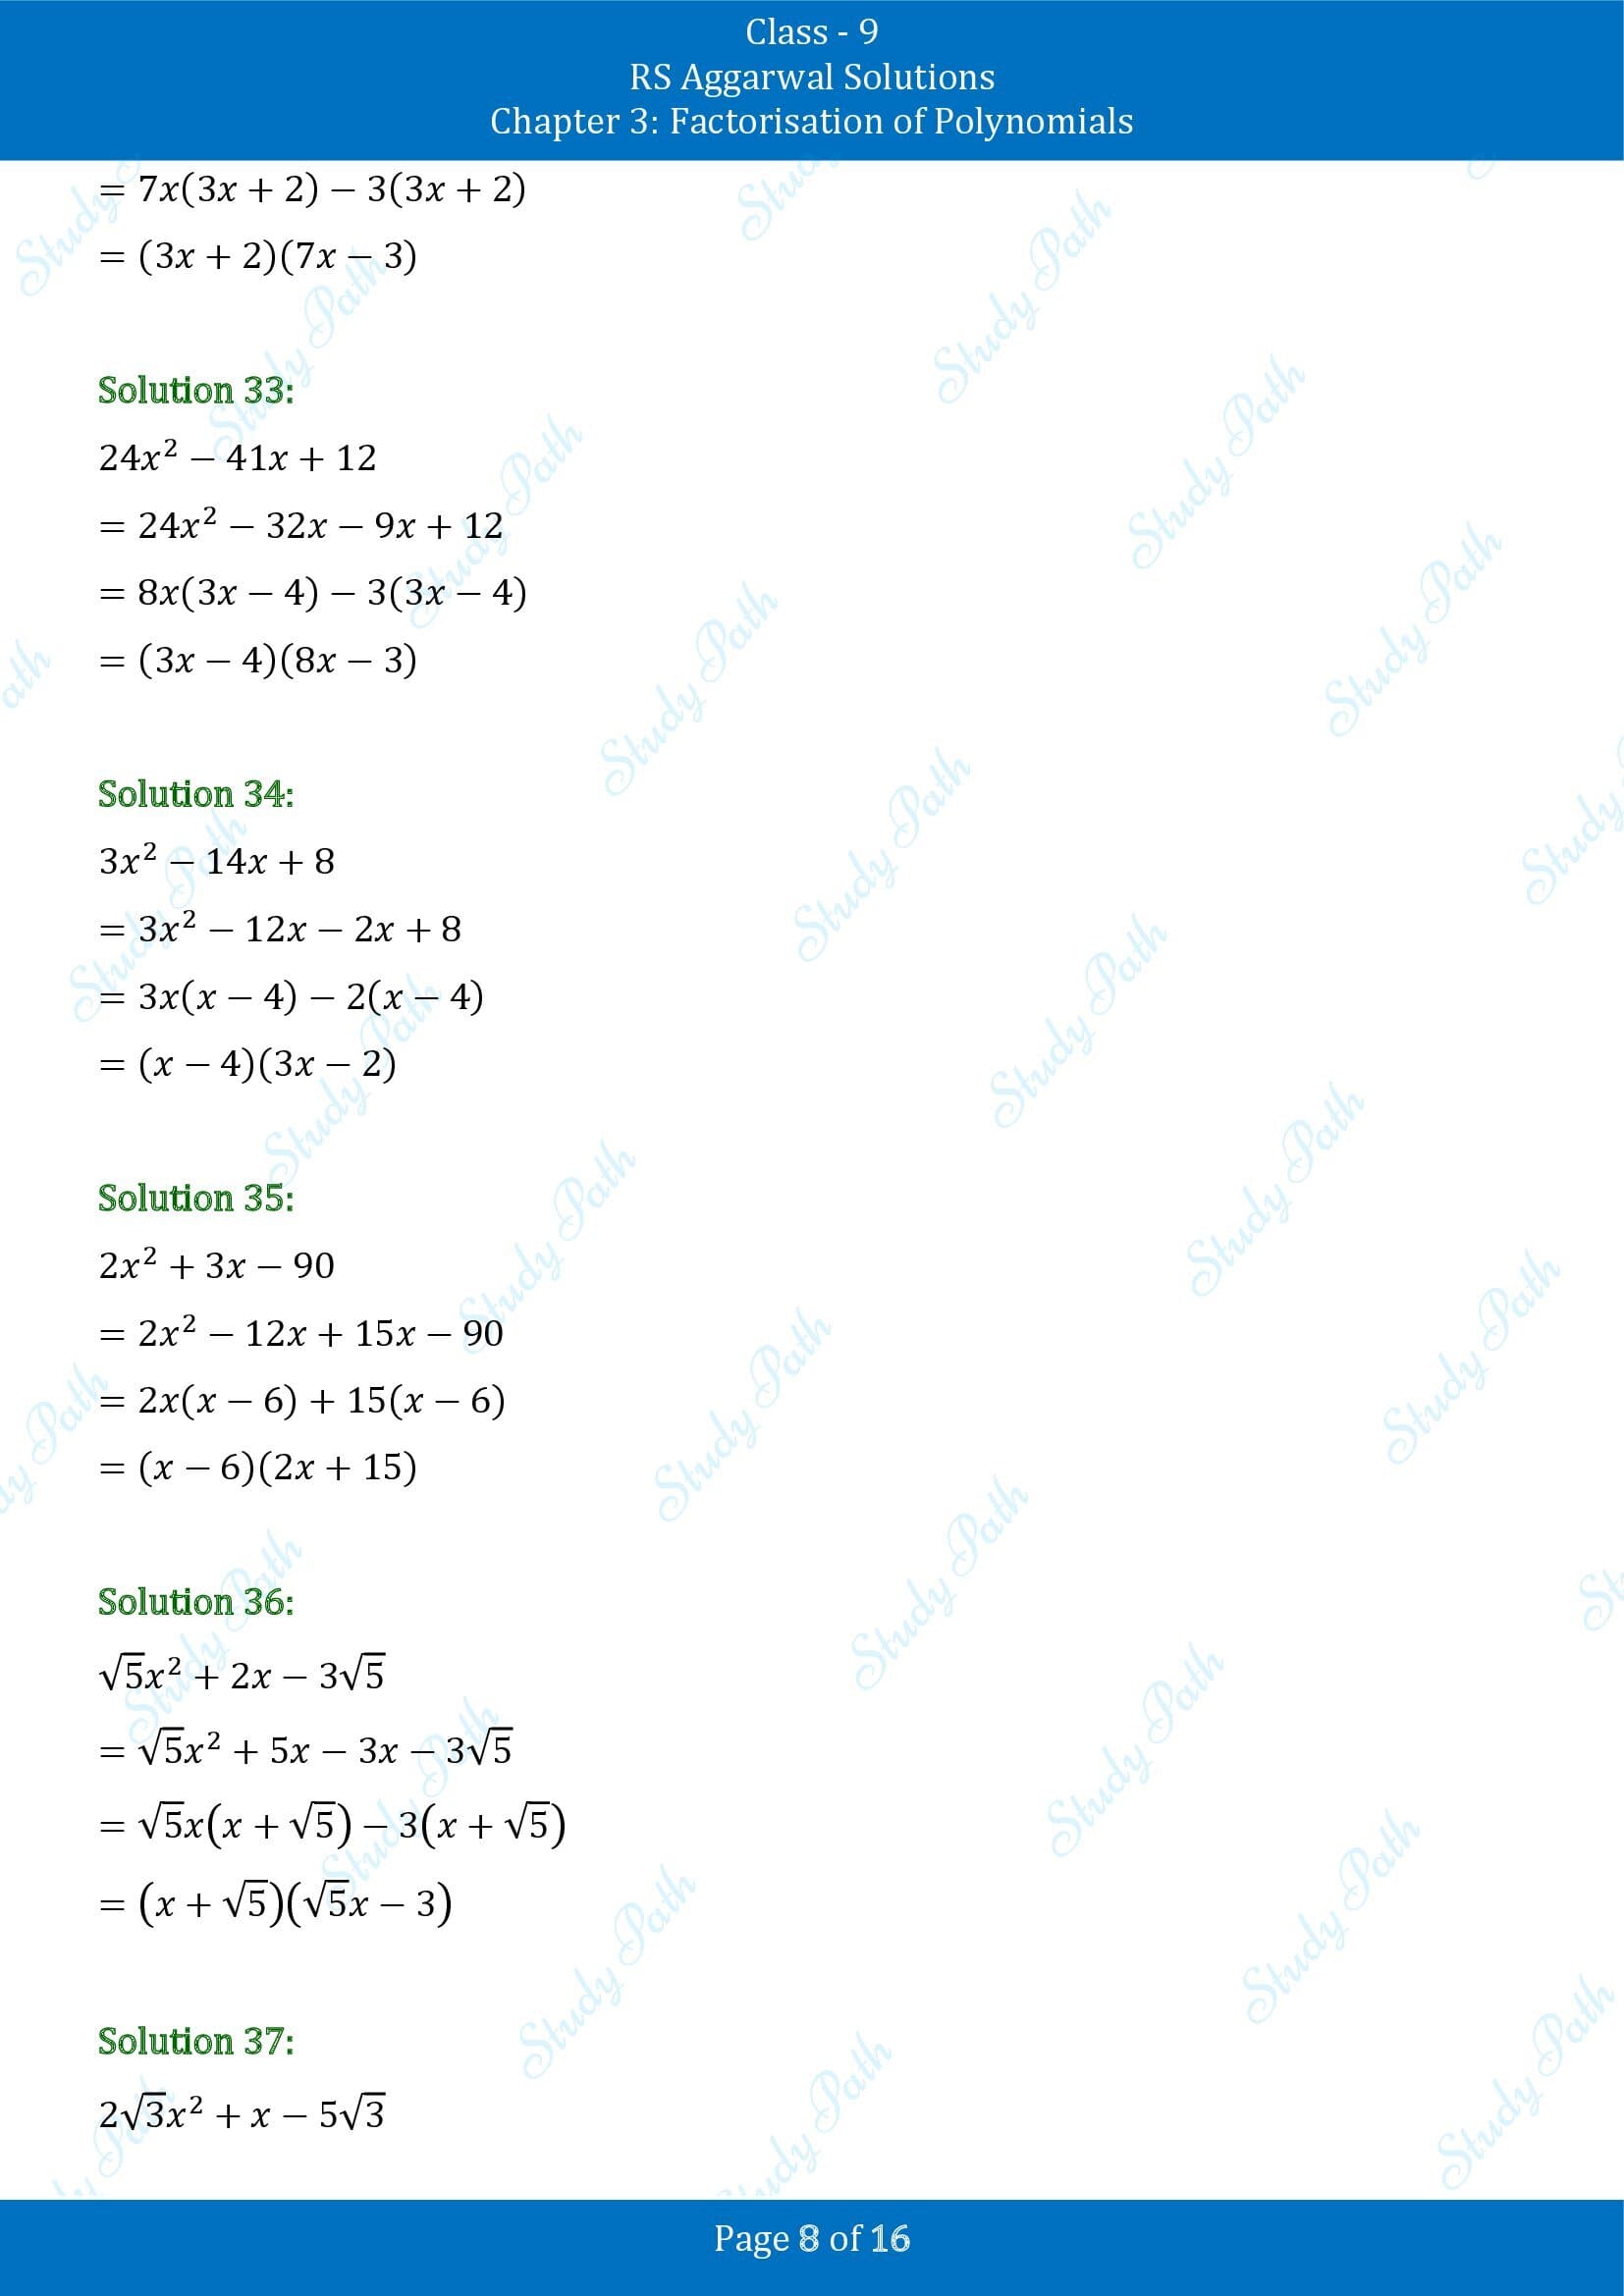 RS Aggarwal Solutions Class 9 Chapter 3 Factorisation of Polynomials Exercise 3C 00008